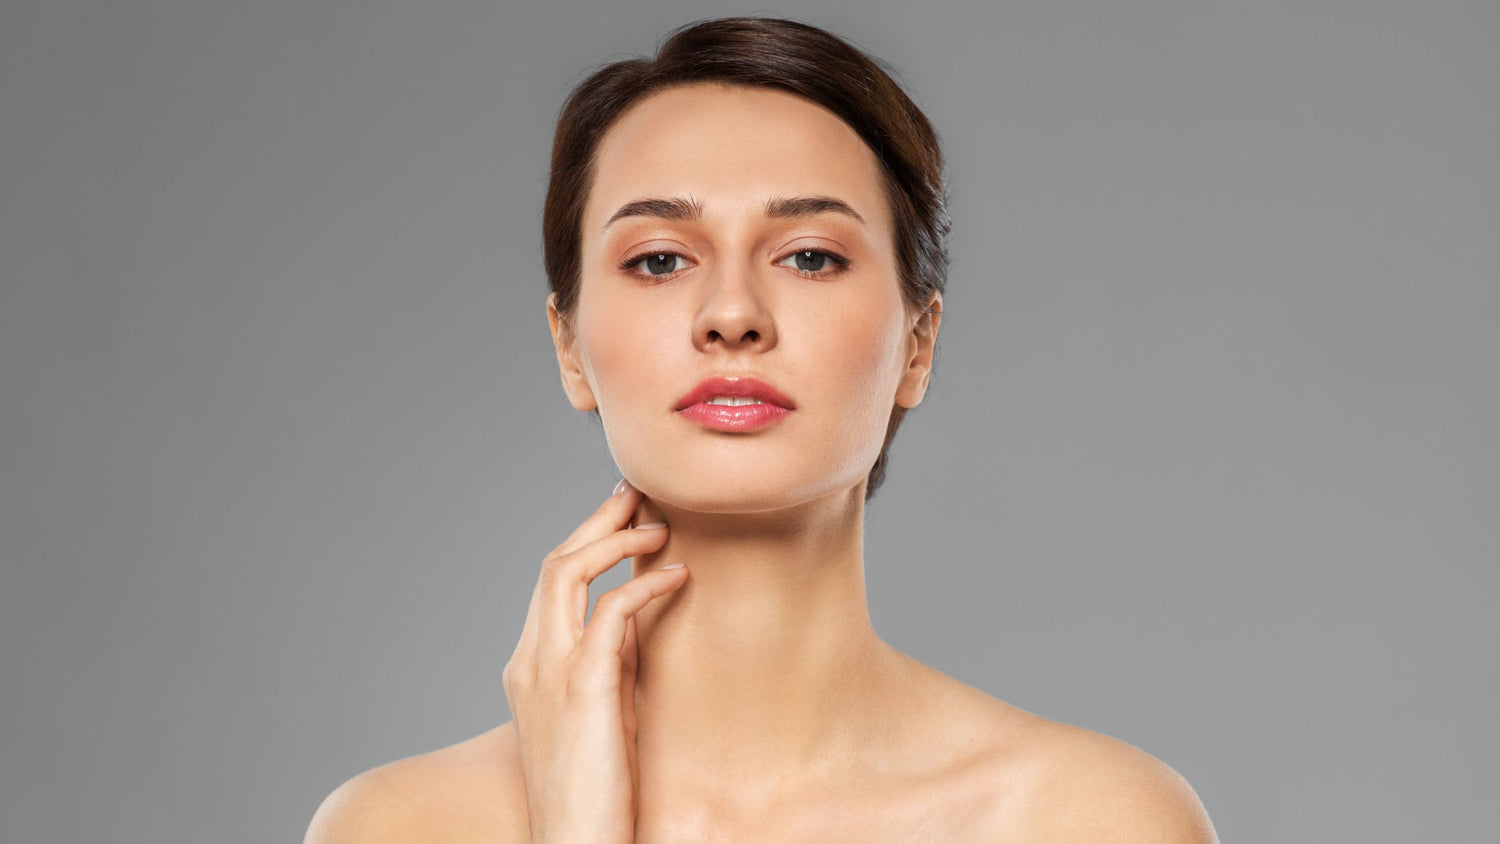 Neck Skincare: The Often-Overlooked Key to a Youthful Appearance